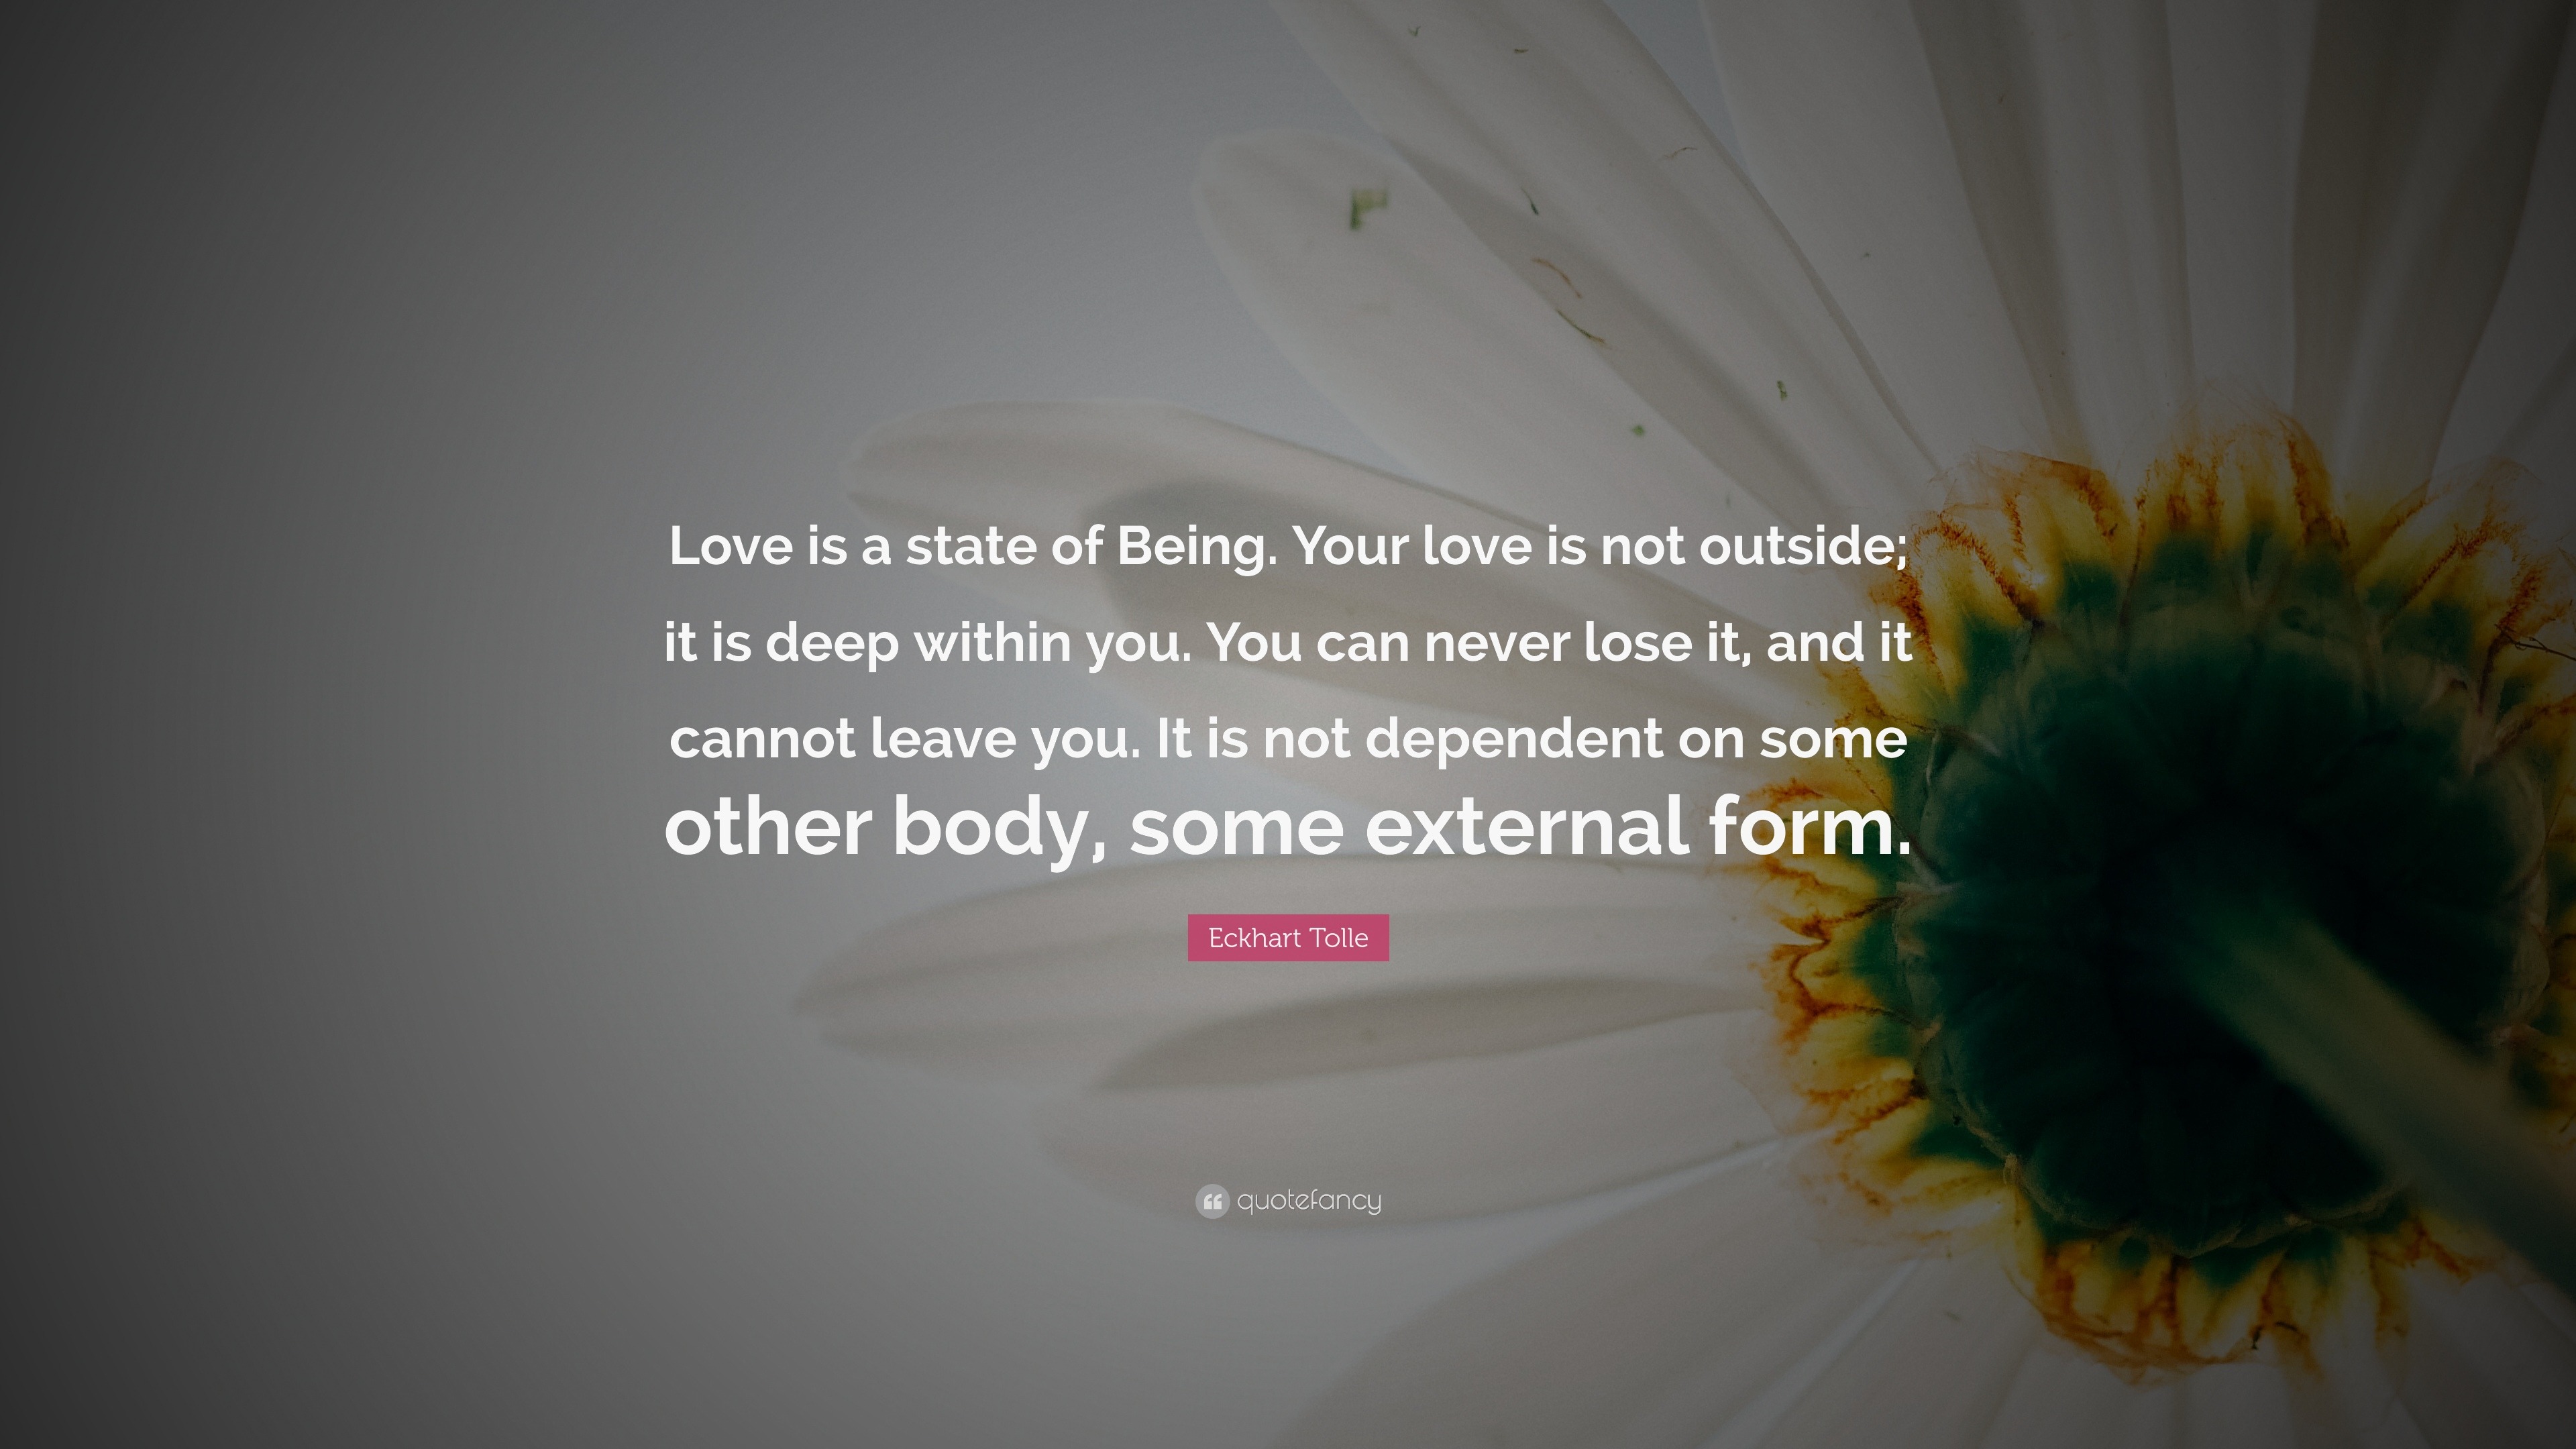 Eckhart Tolle Quote “Love is a state of Being Your love is not